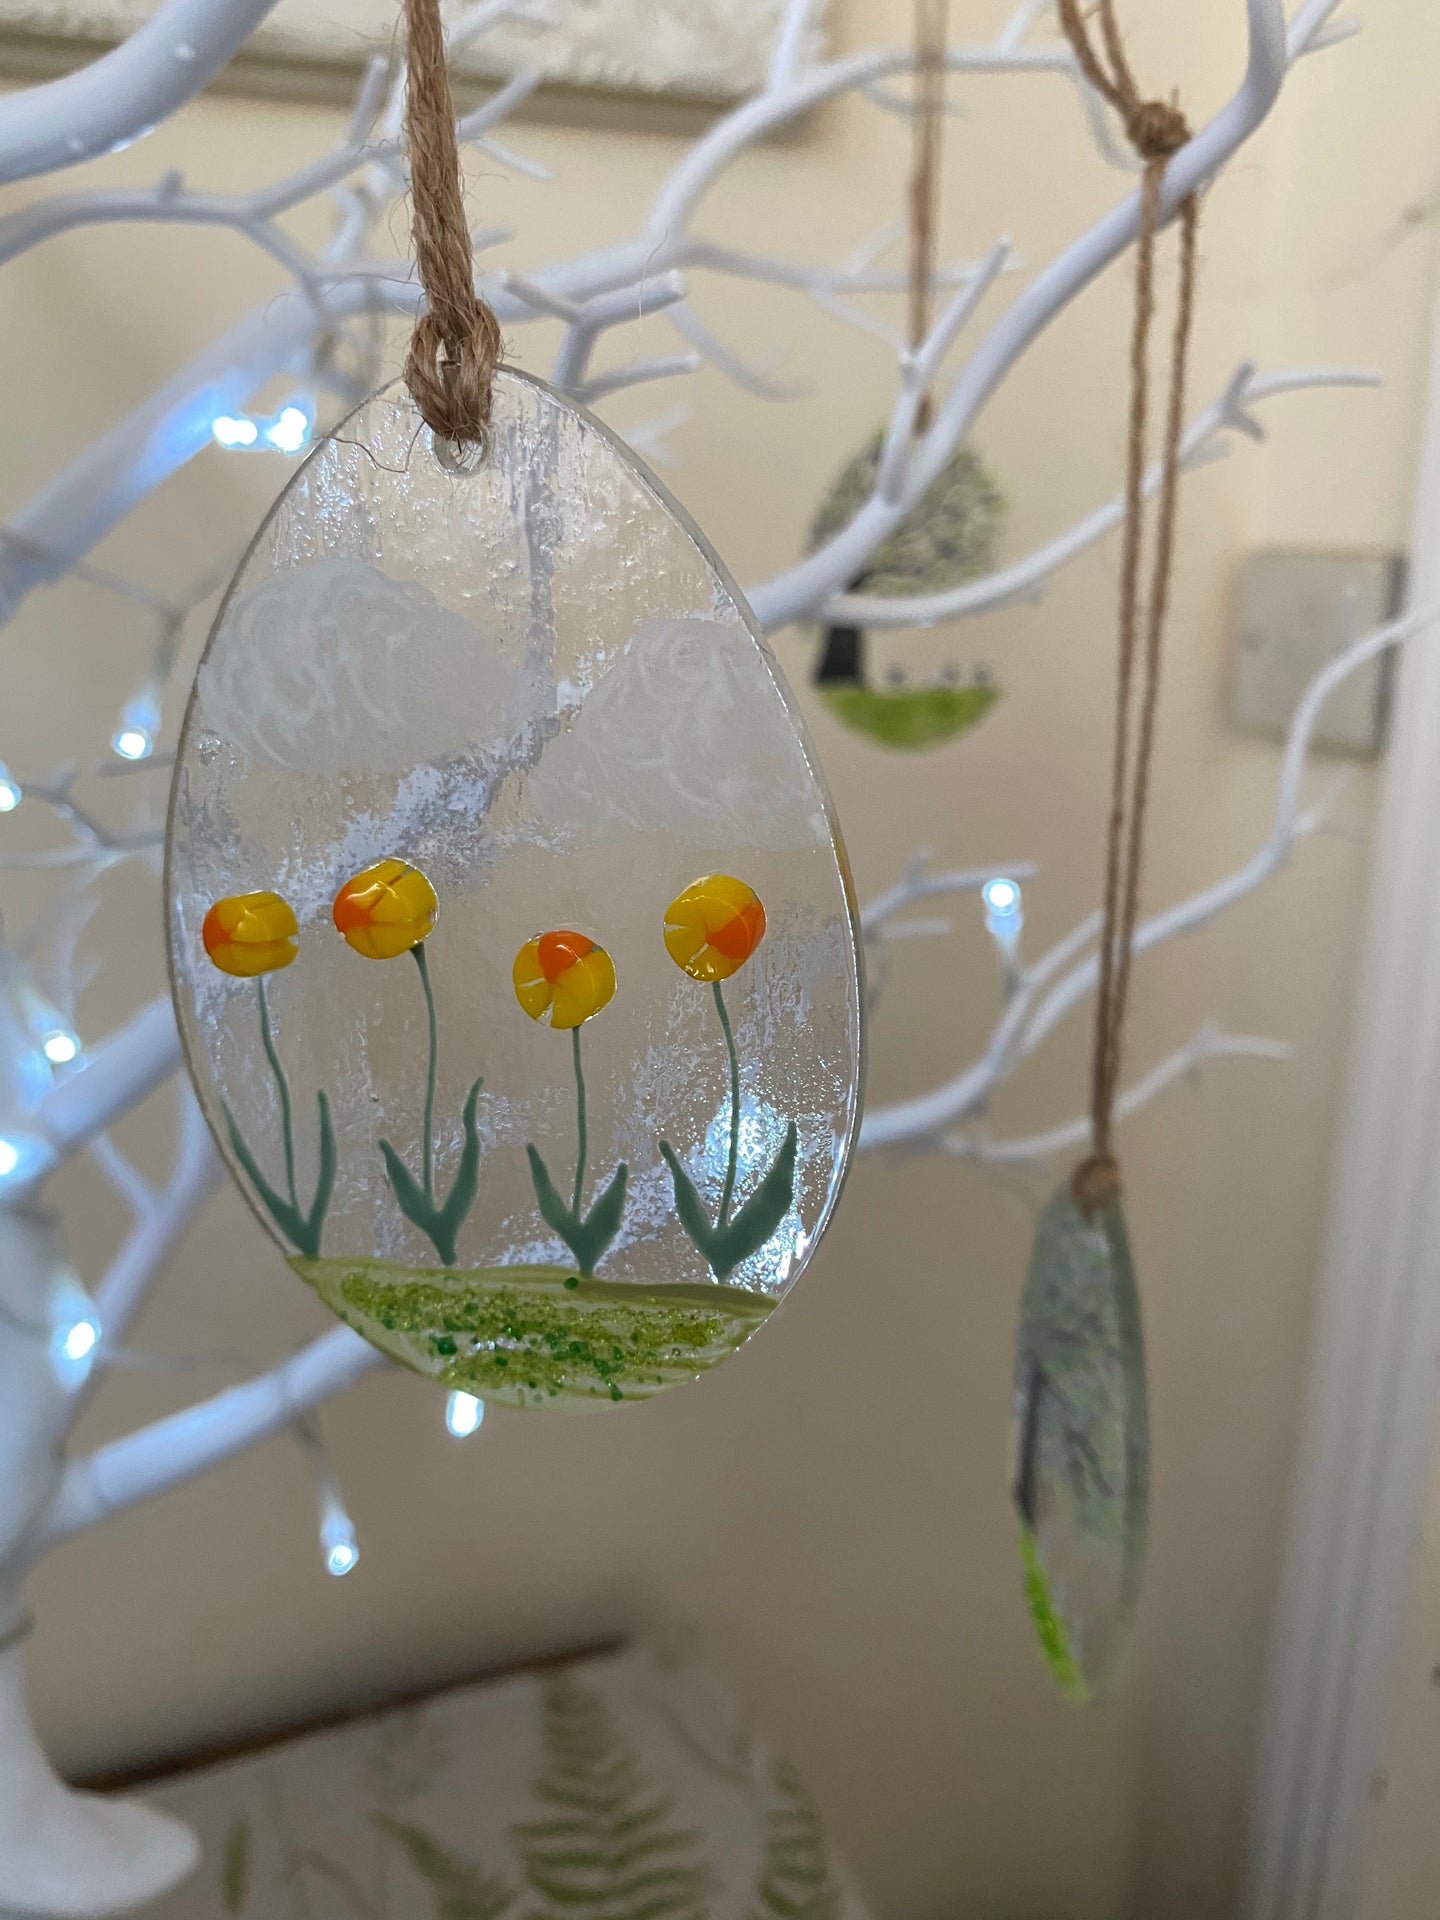 Fused Glass Easter Egg with 3D Daffodil detail 